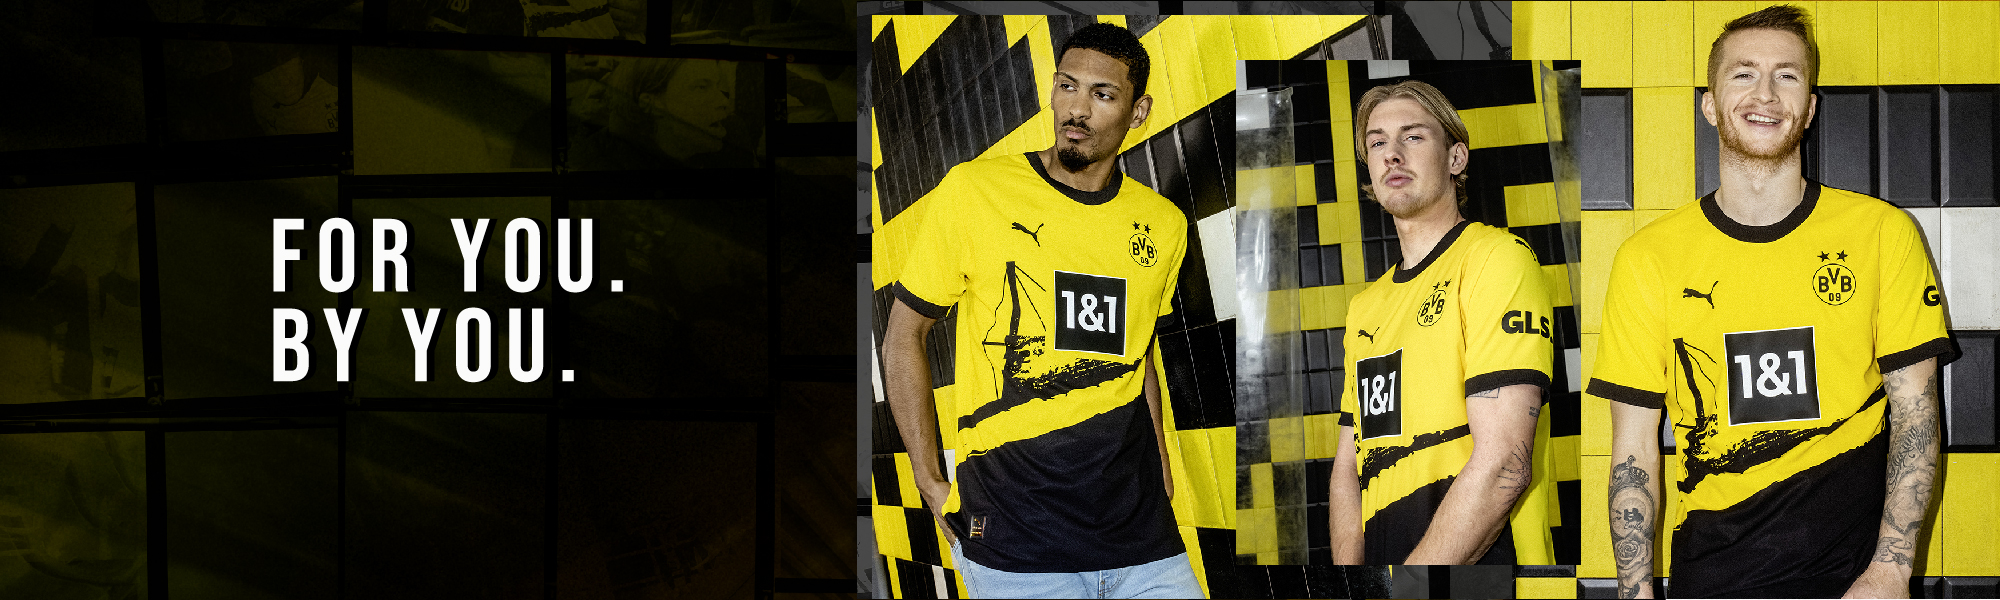 adidas Men's Woven Football Jersey - Advanced Technology for Exceptional  Performance